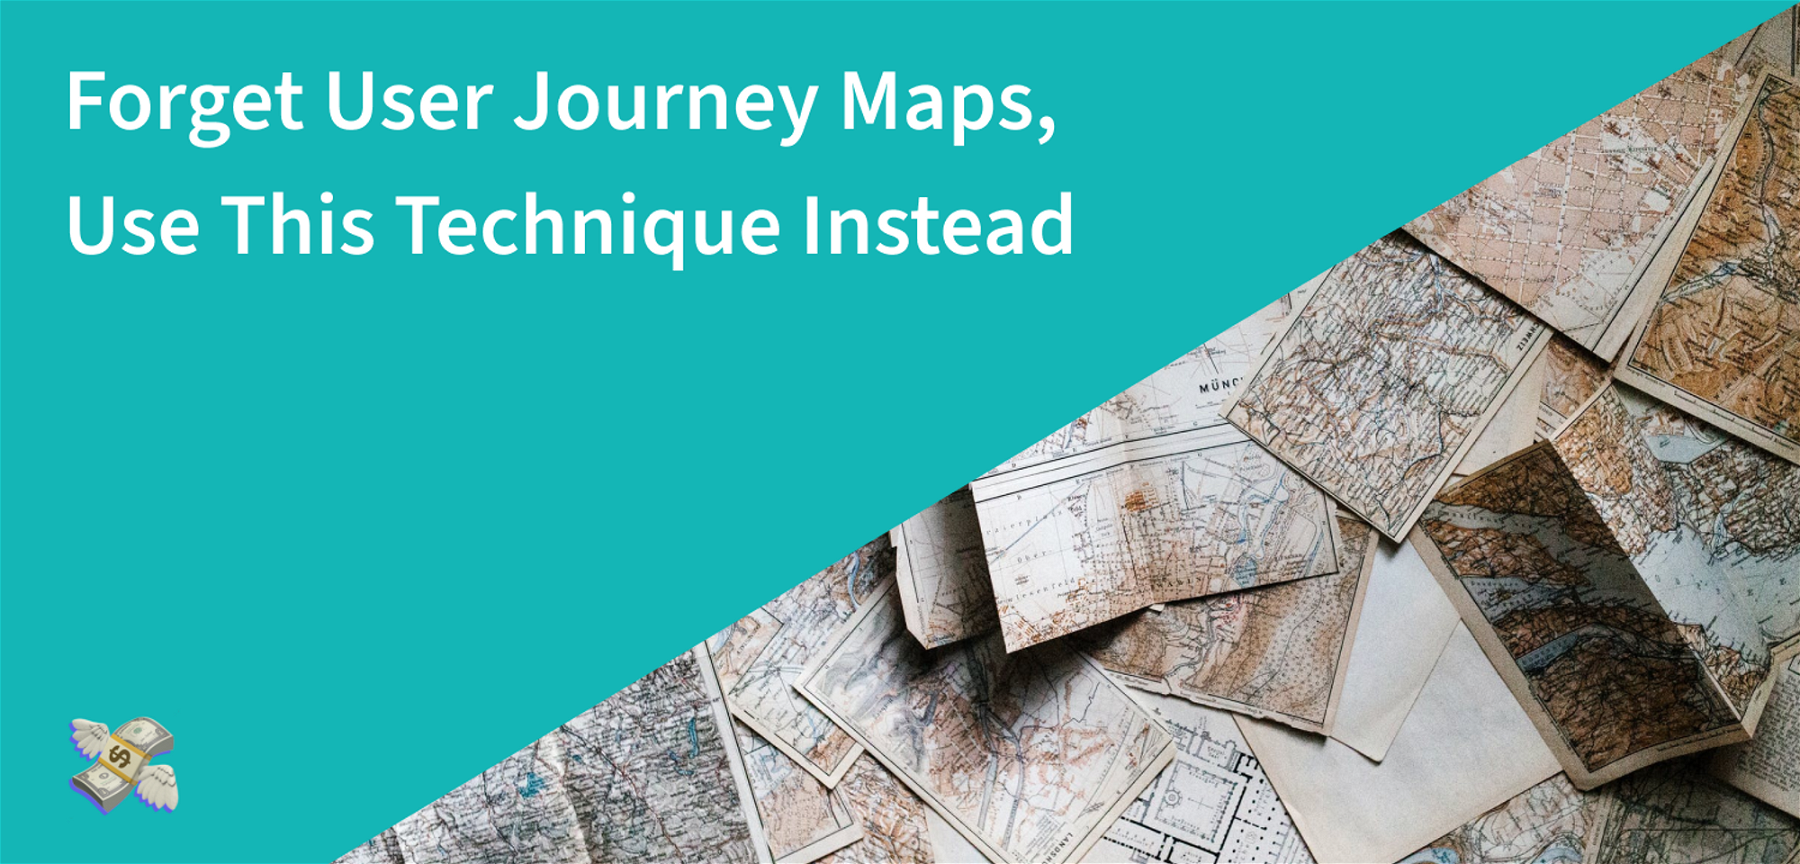 Forget User Journey Maps, Use This Technique Instead